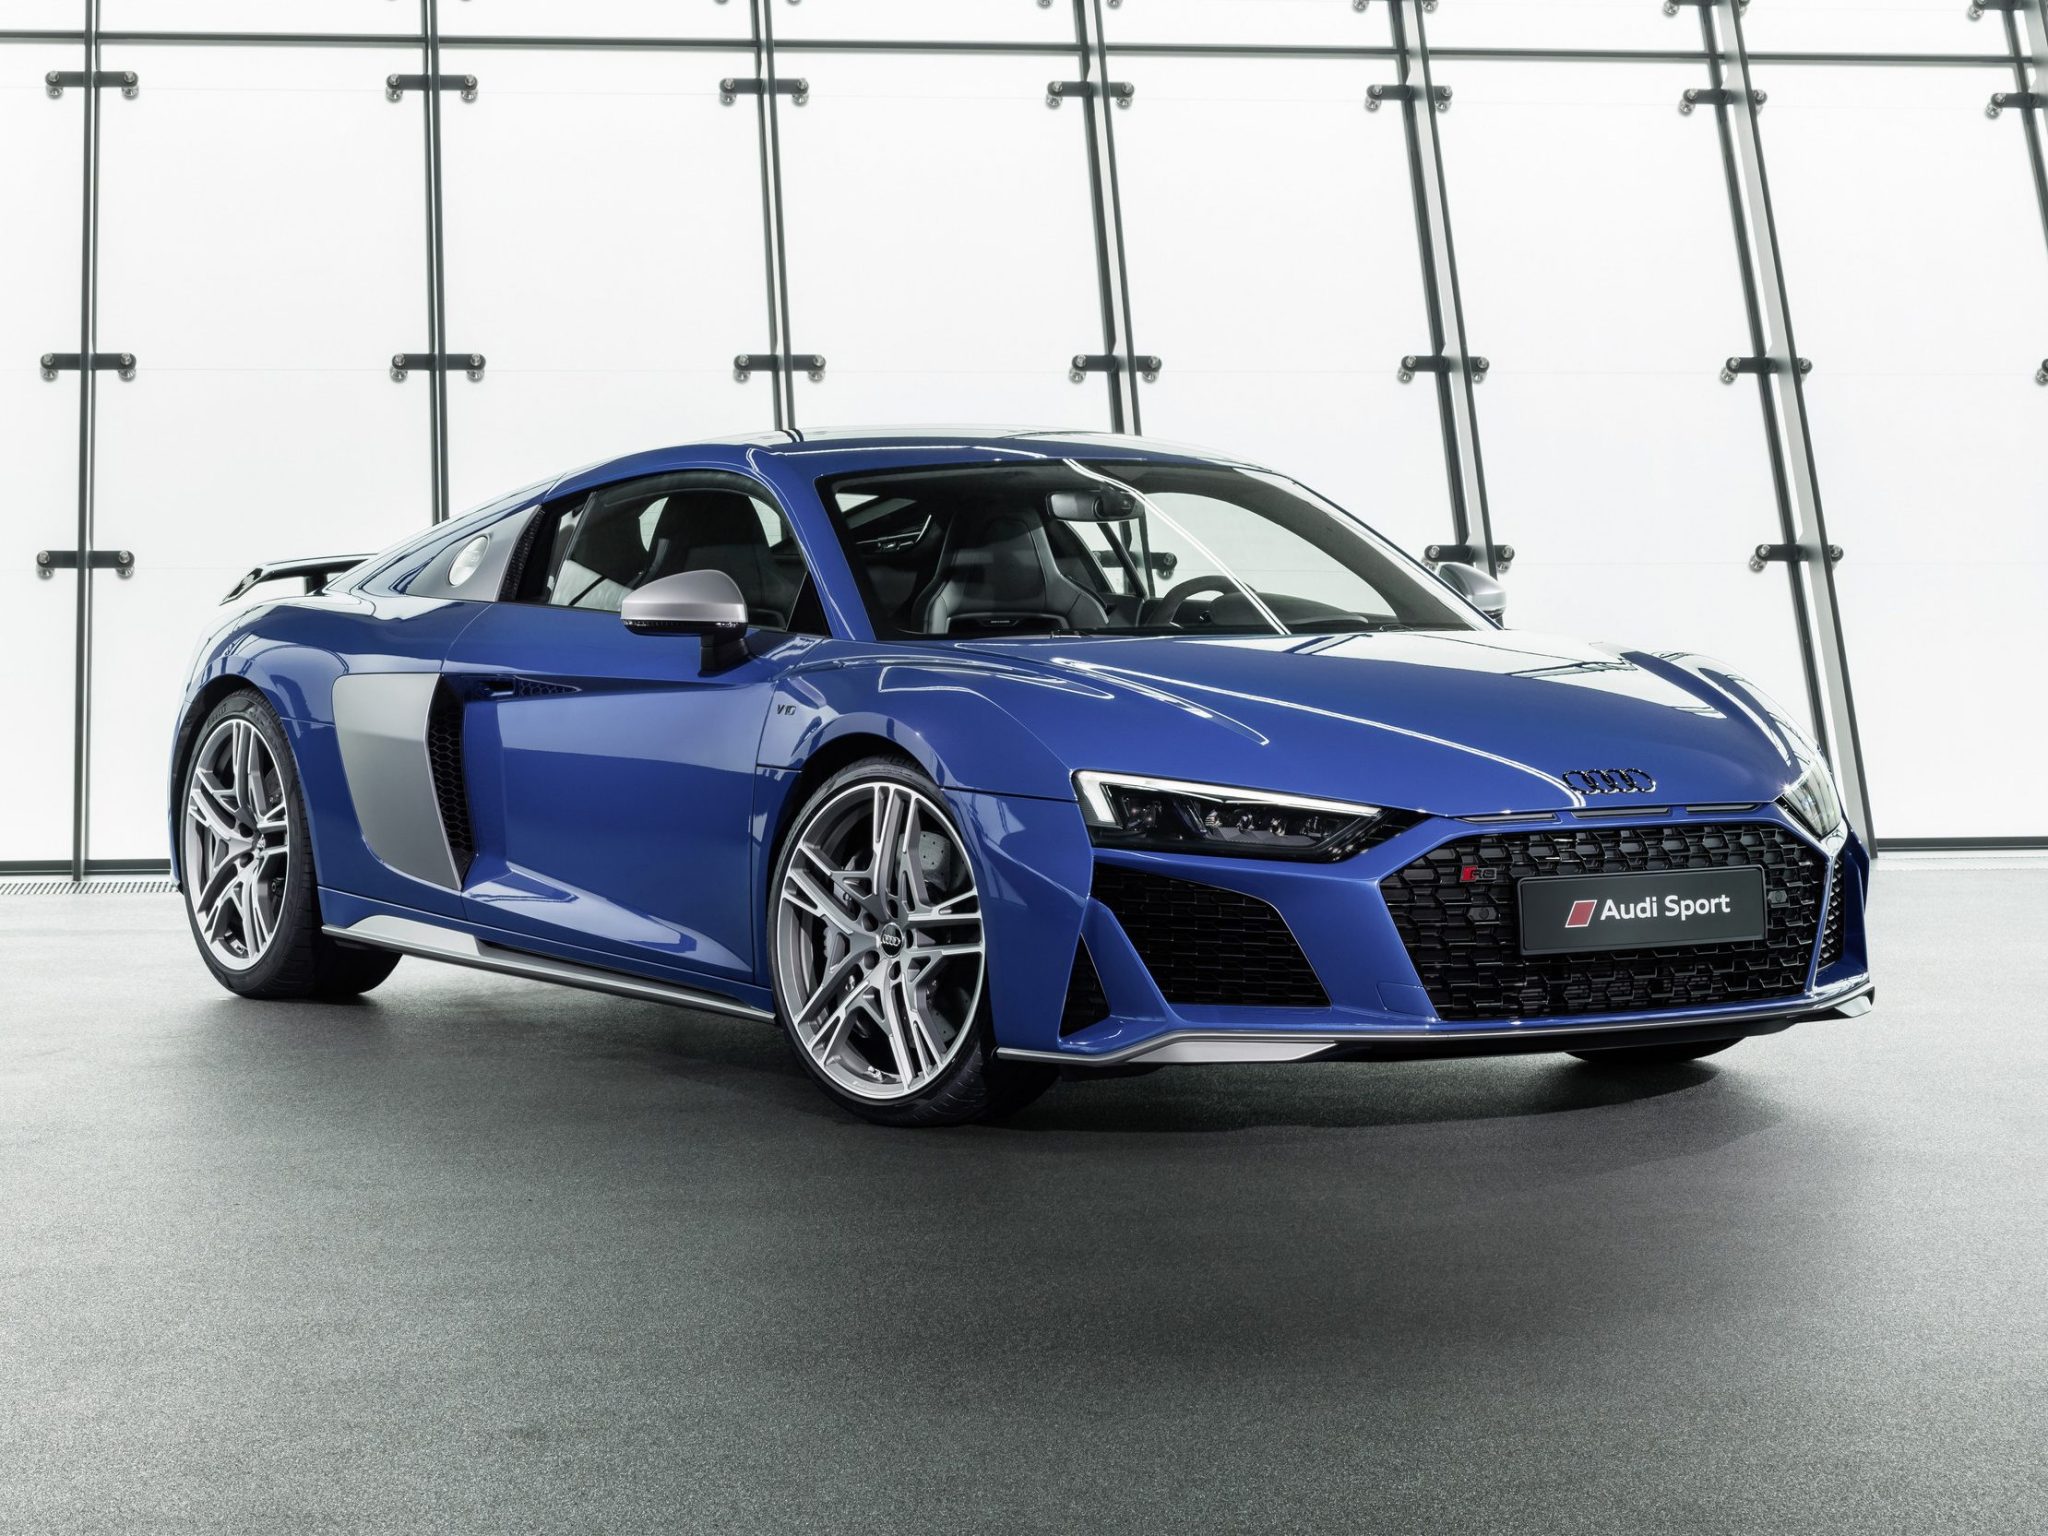 Audi R8 V10 Performance Finally Touches Down in South Africa